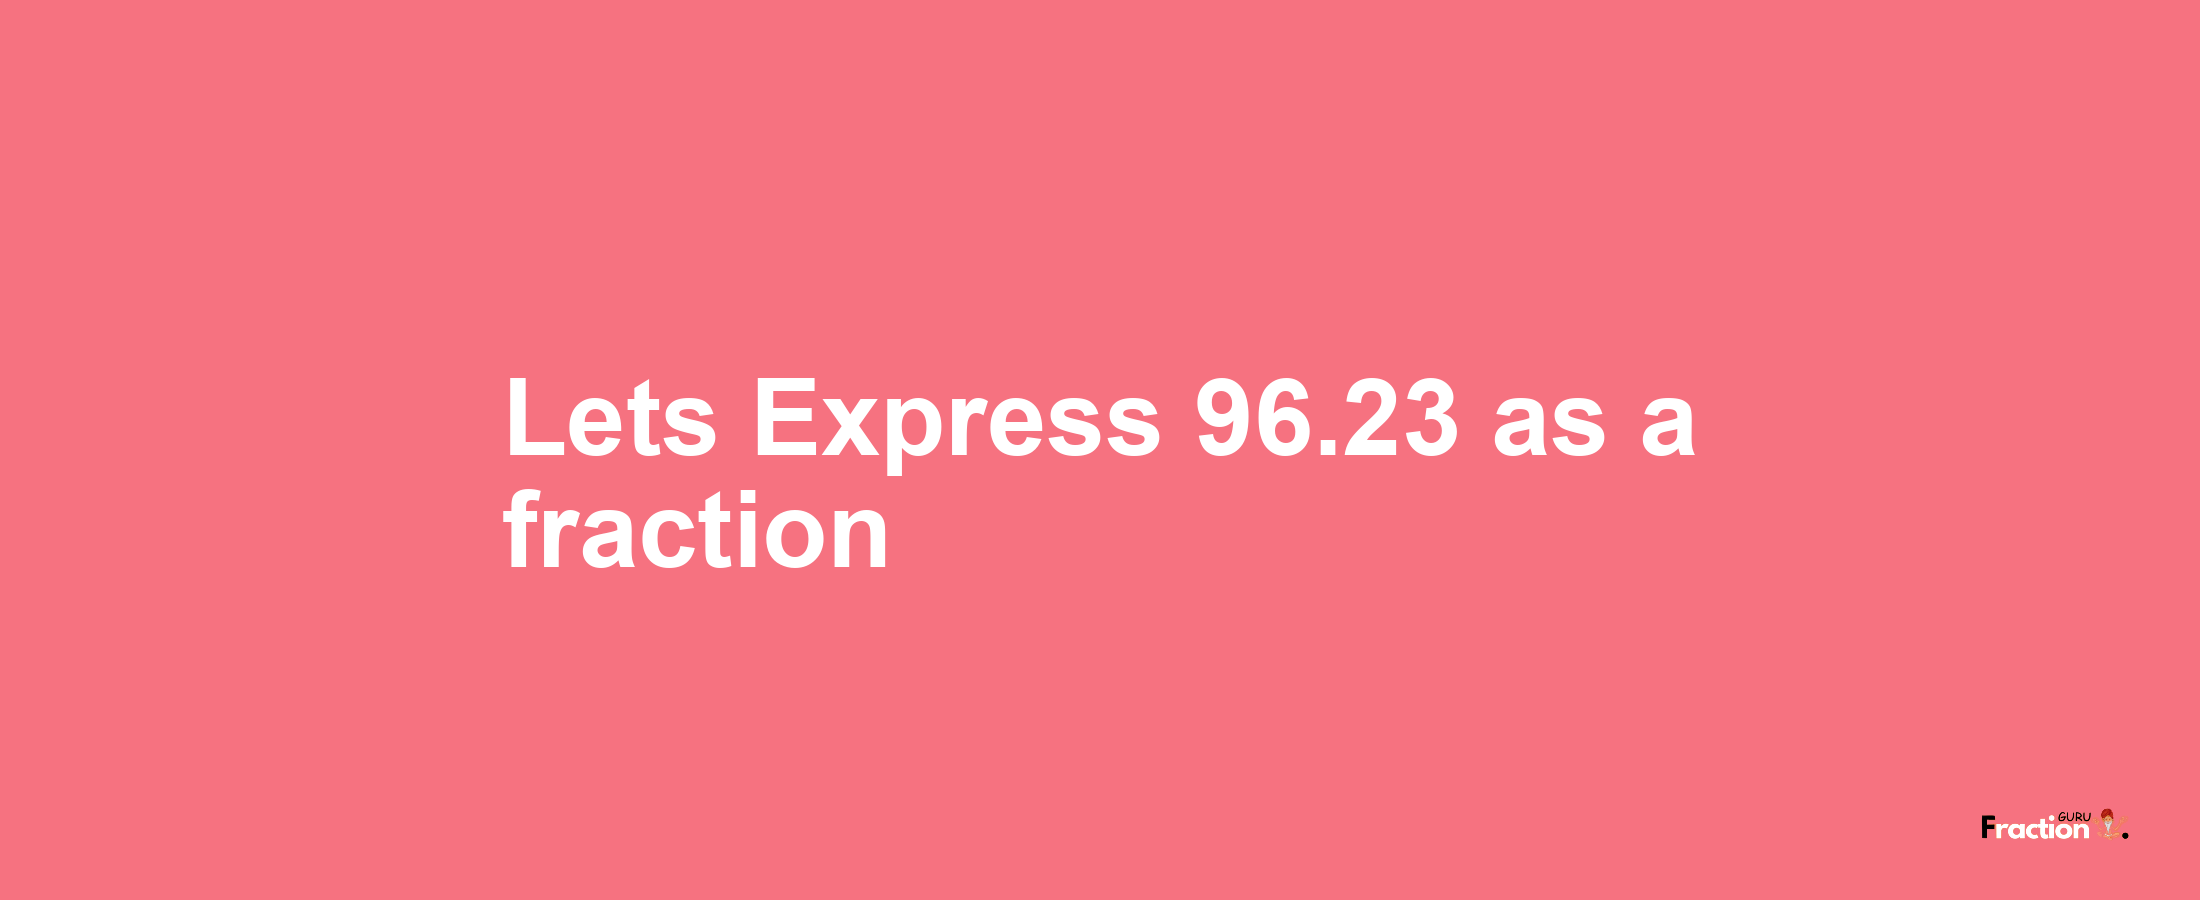 Lets Express 96.23 as afraction